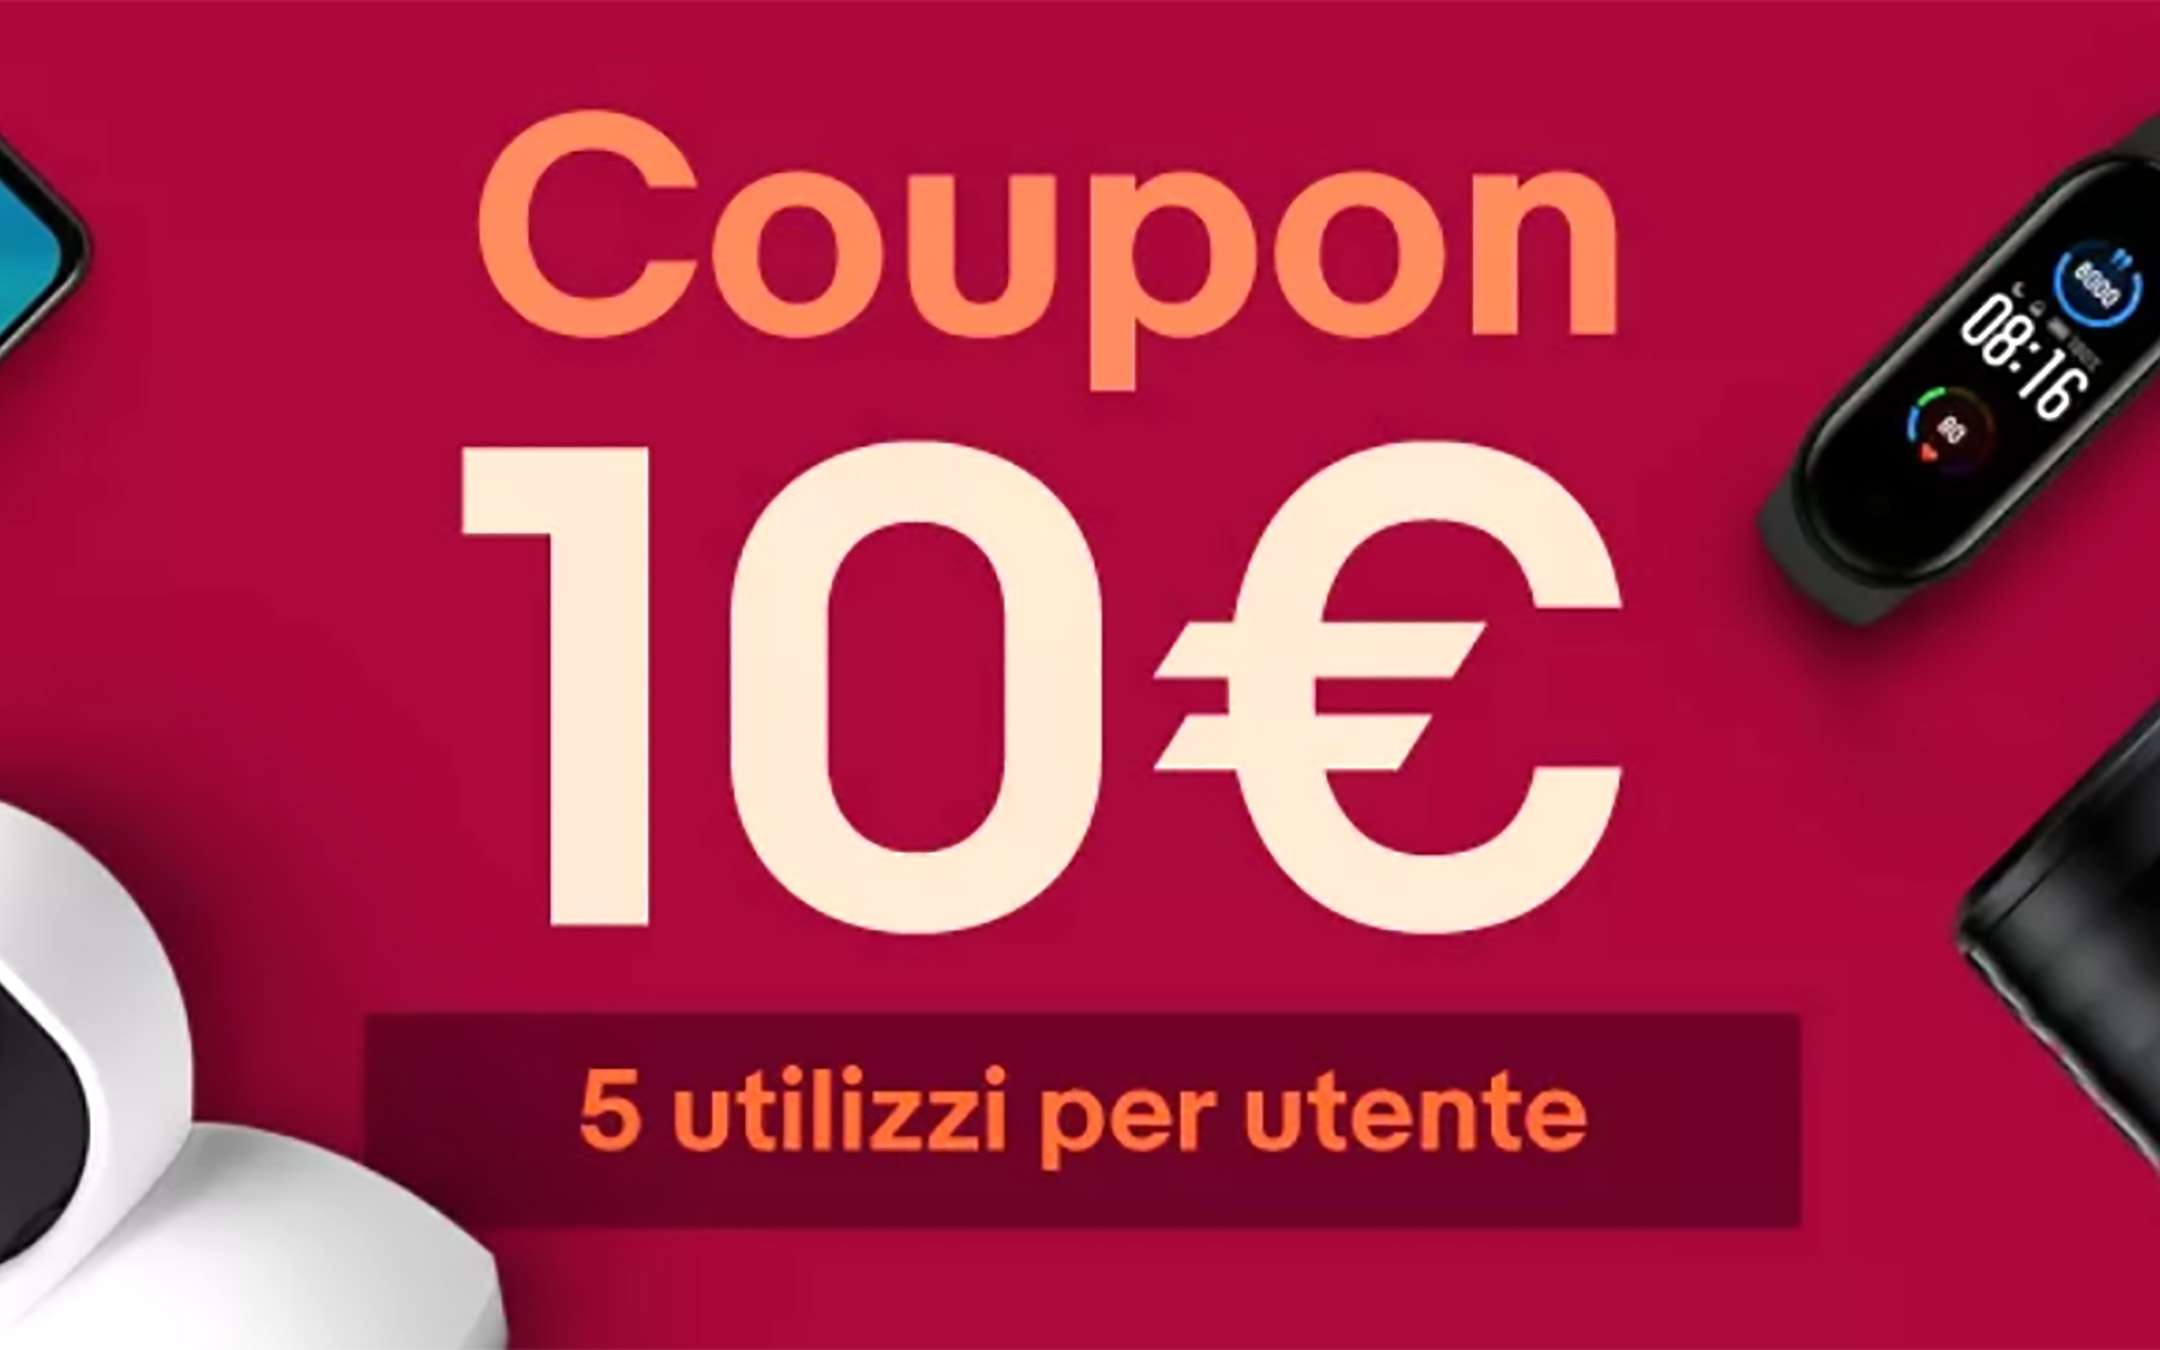 10 euro discount on eBay with this coupon